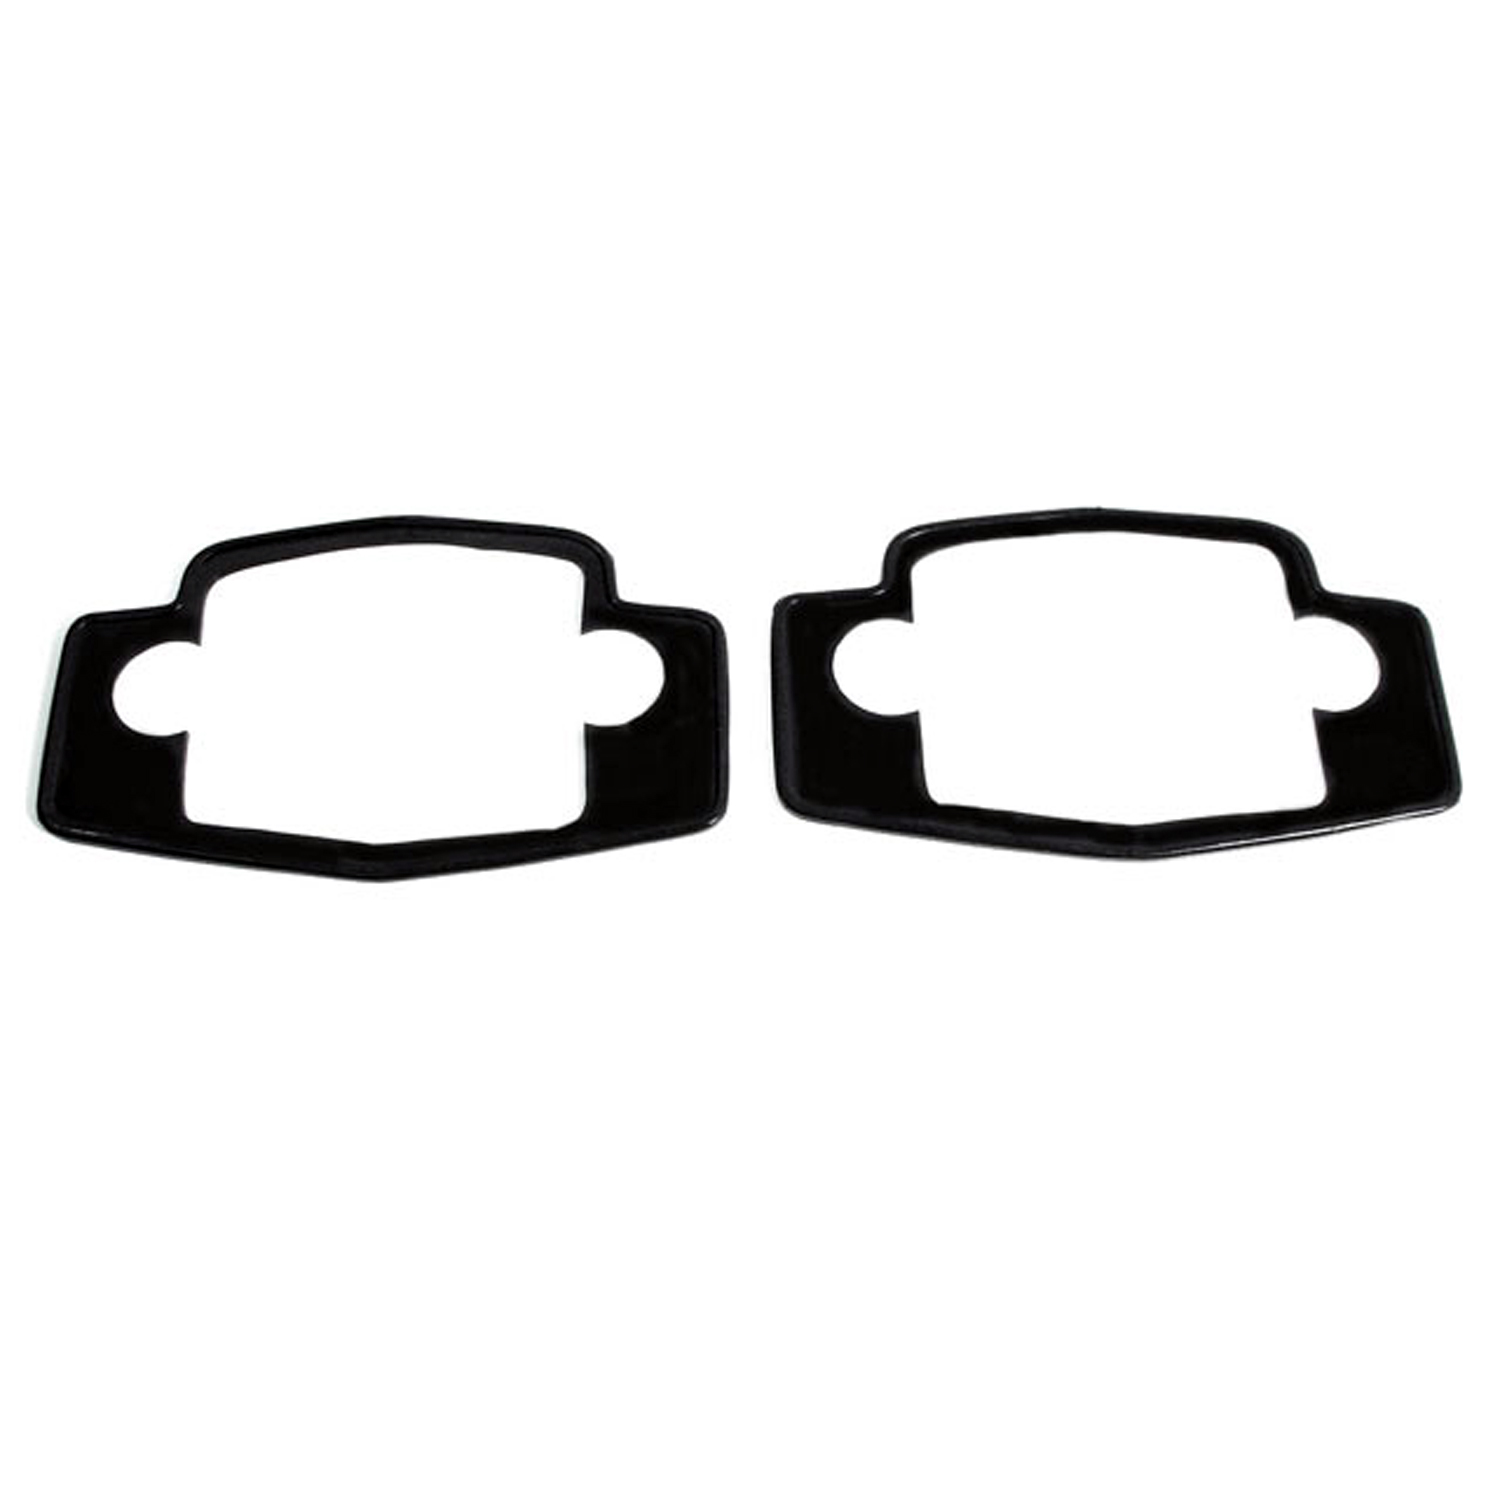 1940 Pontiac DELUXE EIGHT Tail-light Pads.  3-3/4 wide X 6-3/8 long.  Pair-MP 991-C